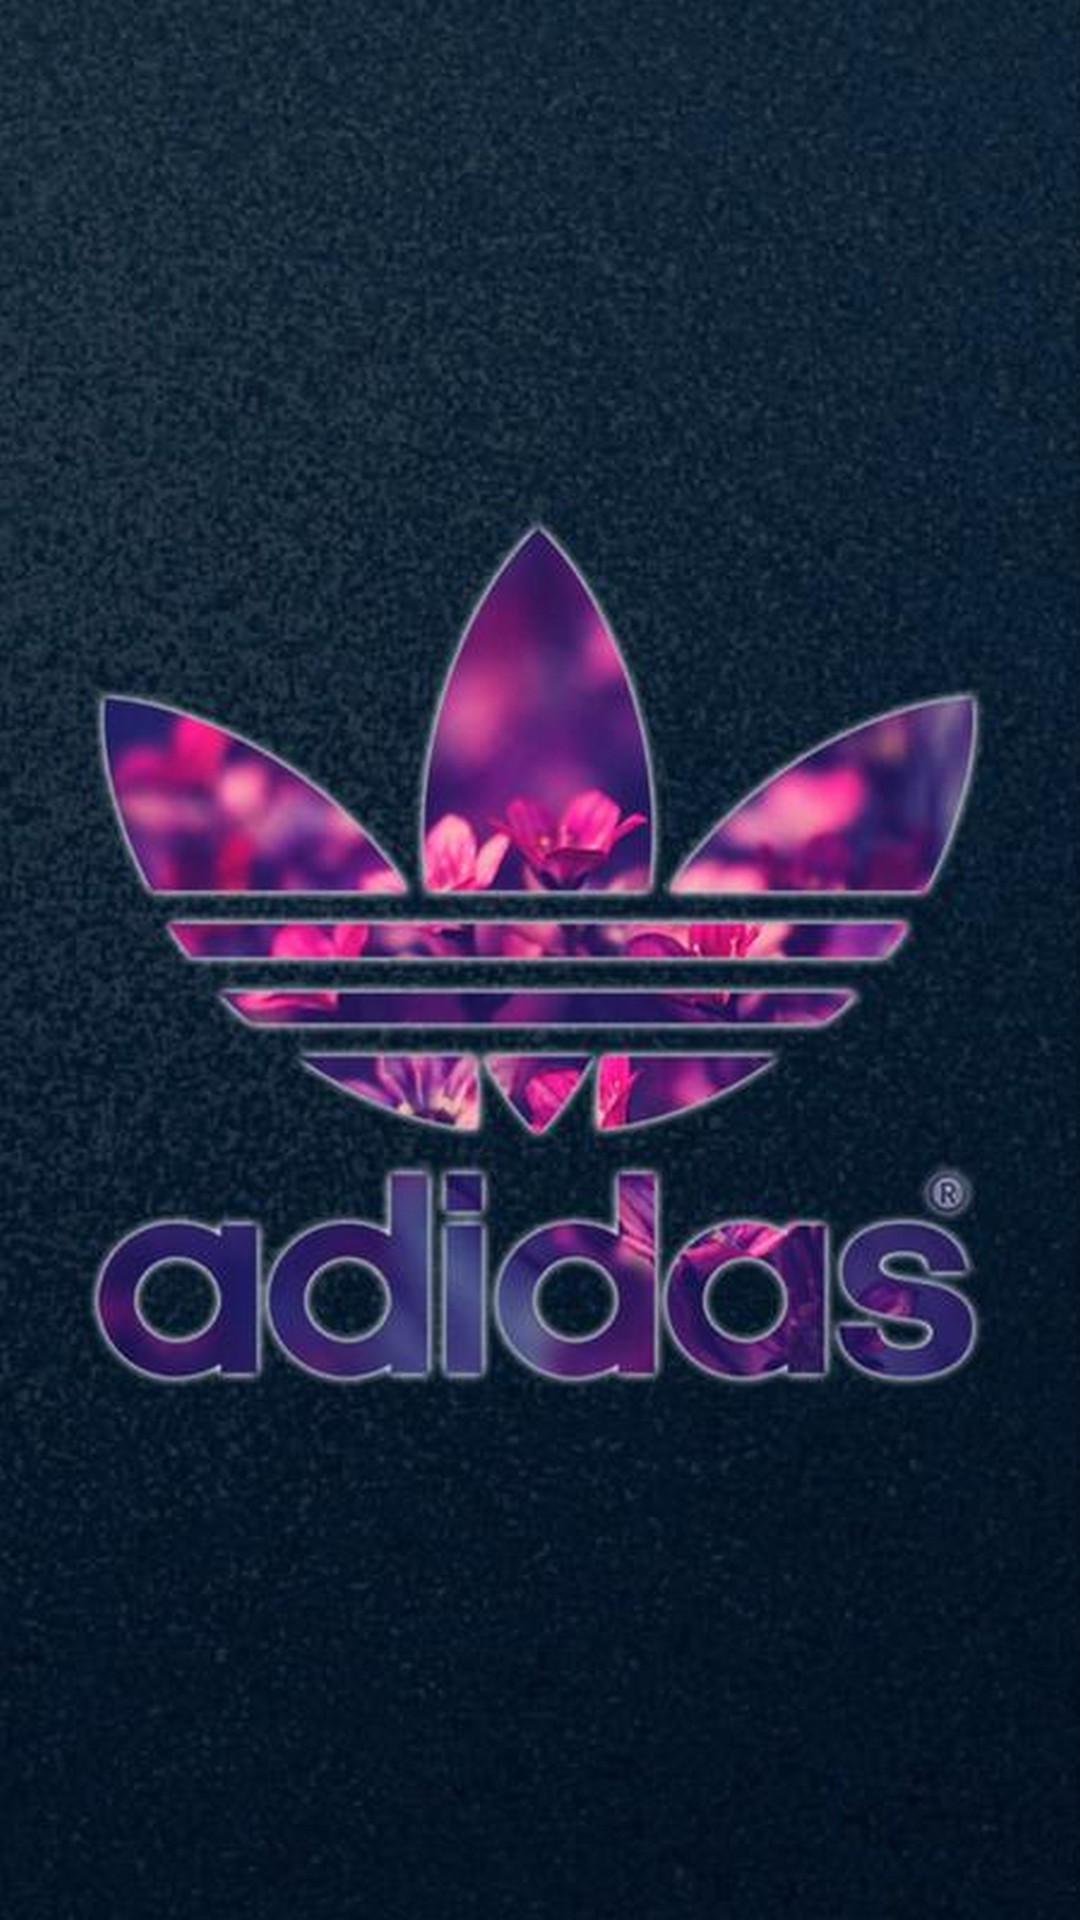 Adidas Logo Phone Wallpaper with high-resolution 1080x1920 pixel. Download all Mobile Wallpapers and Use them as wallpapers for your iPhone, Tablet, iPad, Android and other mobile devices